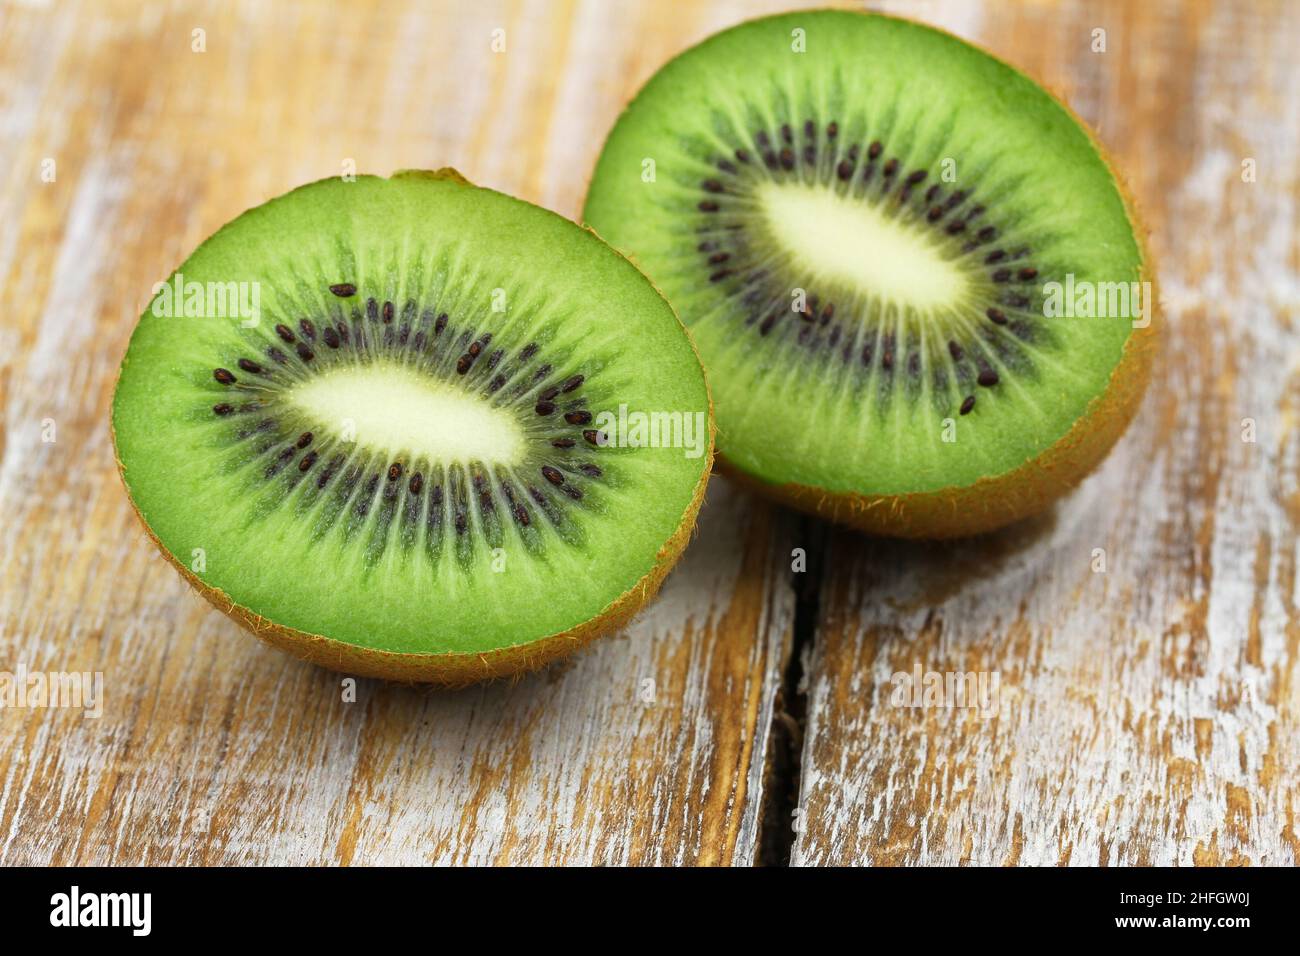 Closeup of two halves of juicy fresh kiwi fruit on rustic wooden surface Stock Photo